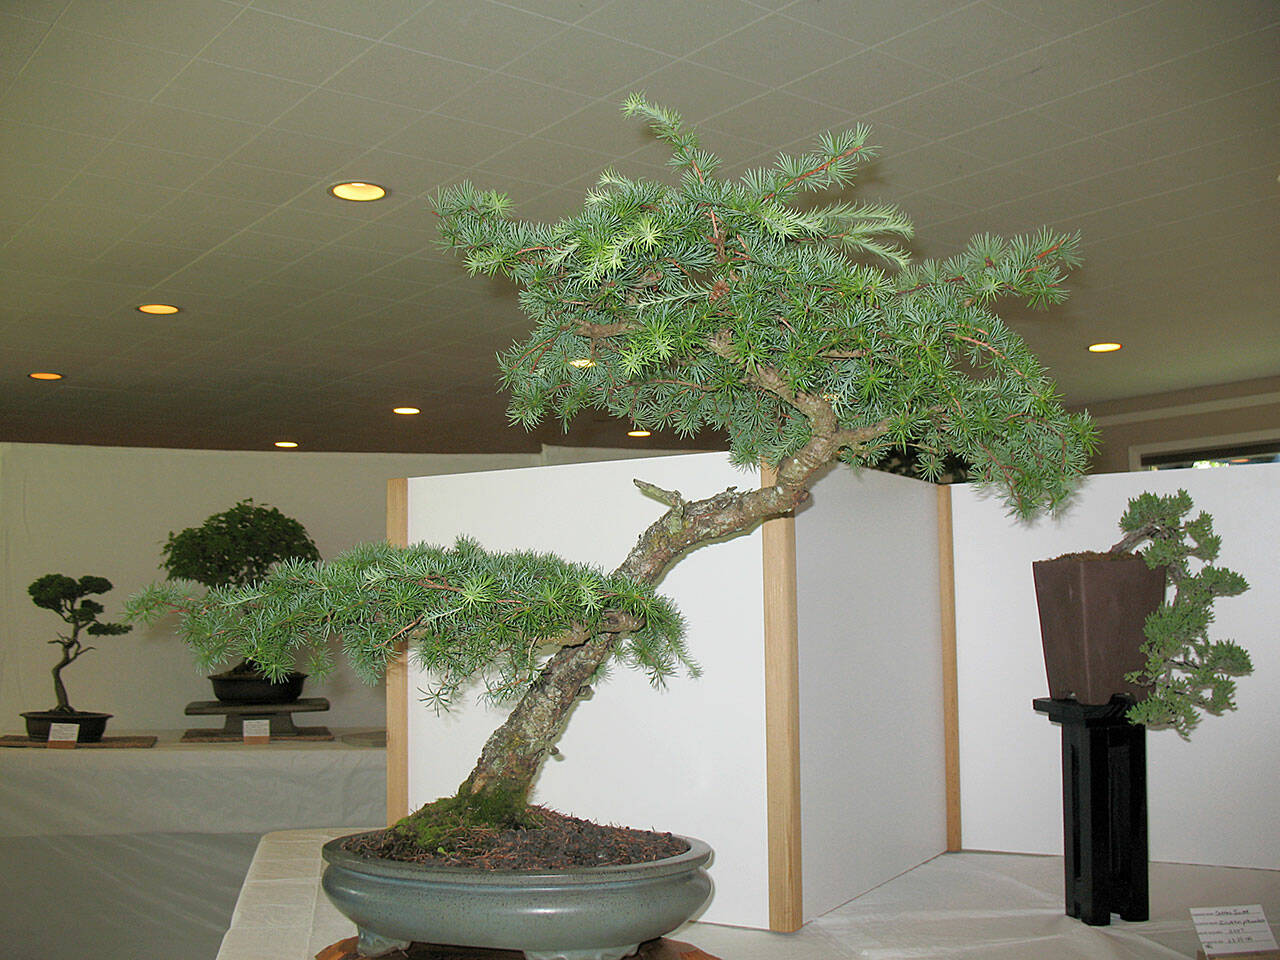 This bonsai is one of many bonsai trees on display on July 2 from the Dungeness Bonsai Society in Pioneer Memorial Park’s clubhouse. (Ron Quigley)